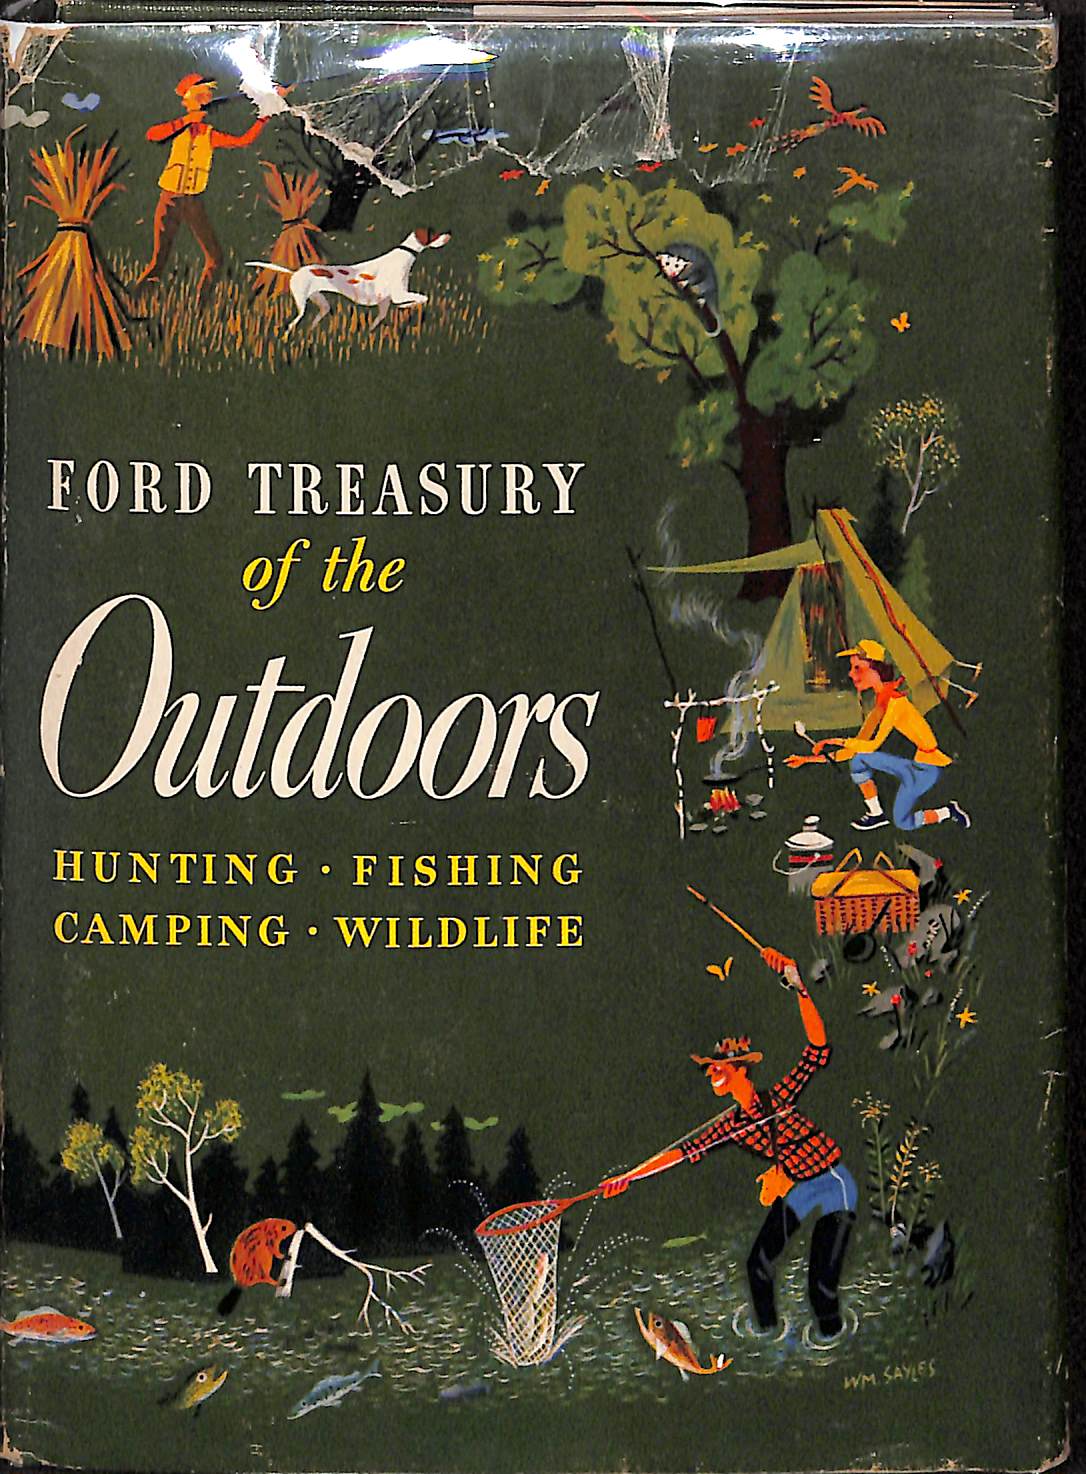 Ford Treasury of the Outdoors: Hunting Fishing Camping Wildlife 1952